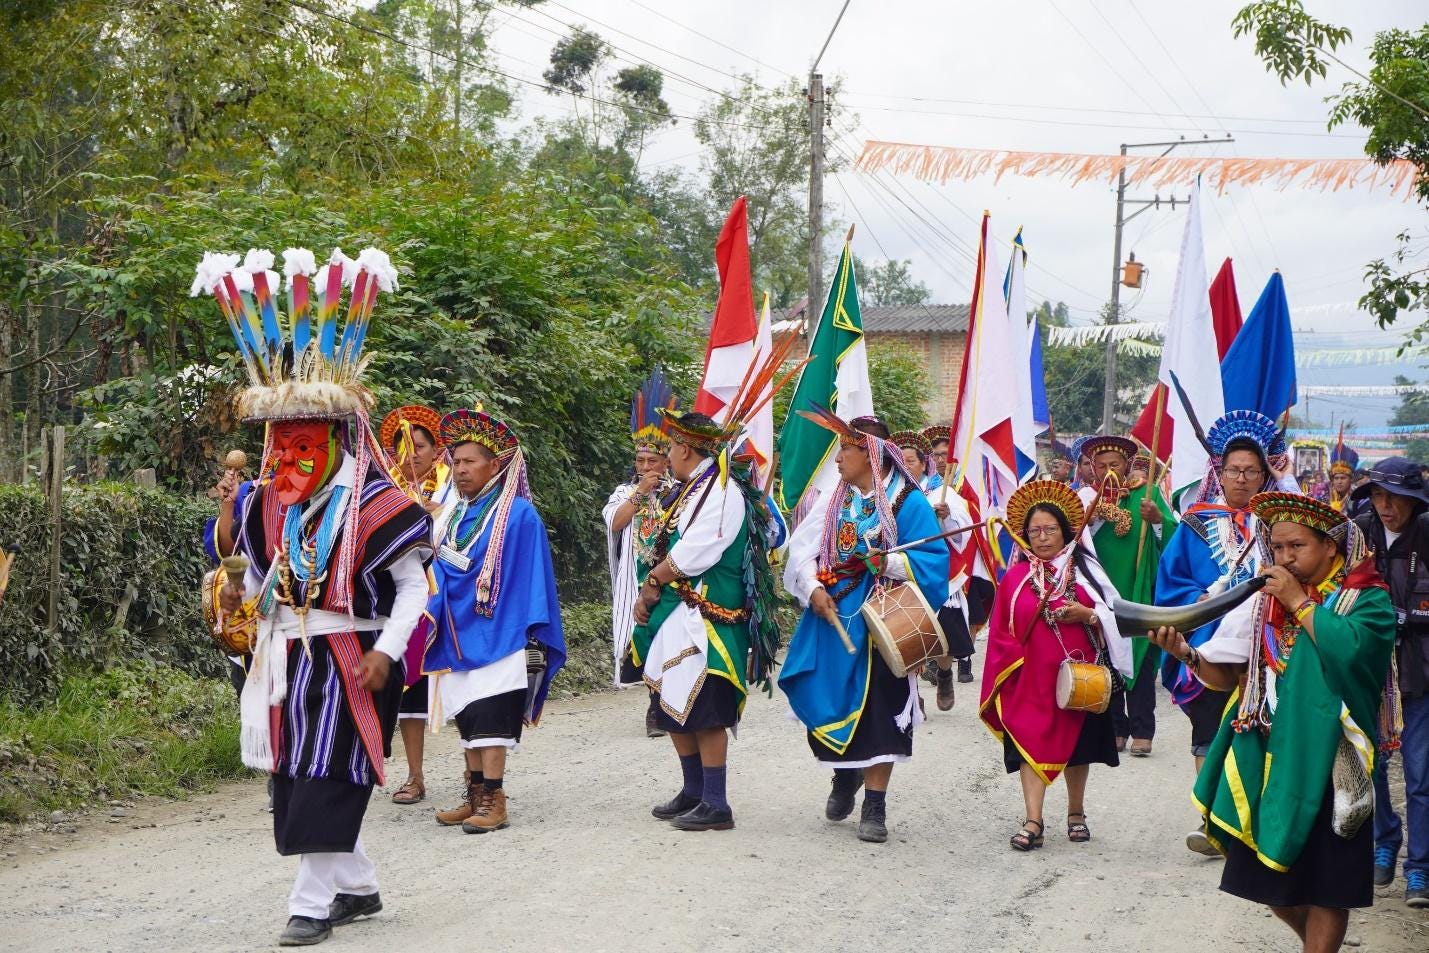 A group of people in traditional clothing walking down a road

Description automatically generated